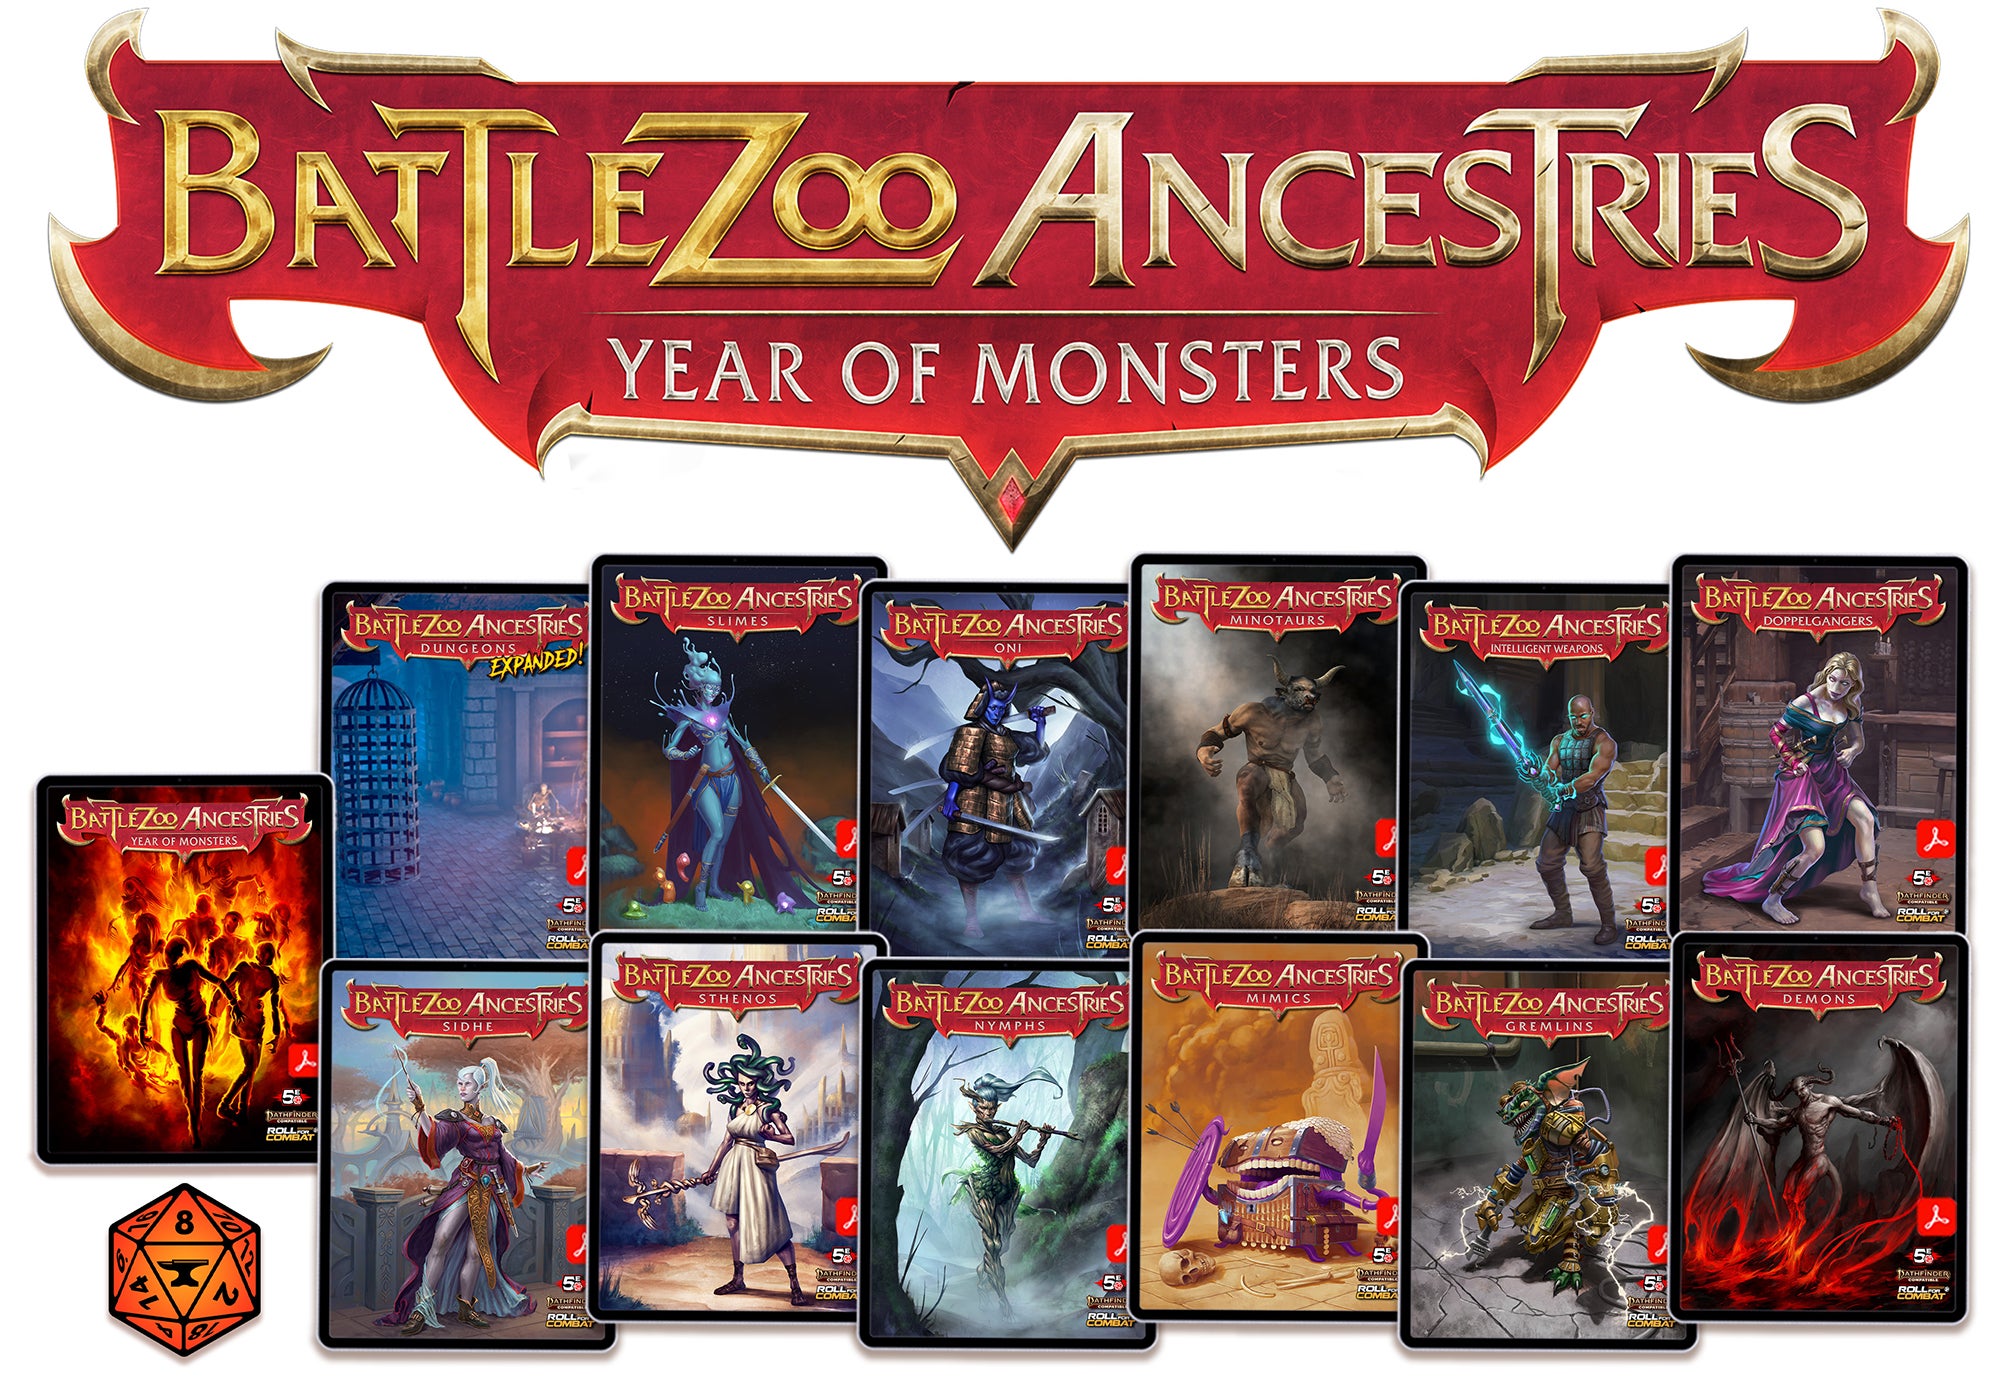 Battlezoo Ancestries: Year of Monsters will allow you to play as a demon, gremlin, intelligent weapon, dungeon, oni, nymph, doppelganger, minotaur, slime, stheno, mimic, and sidhe.